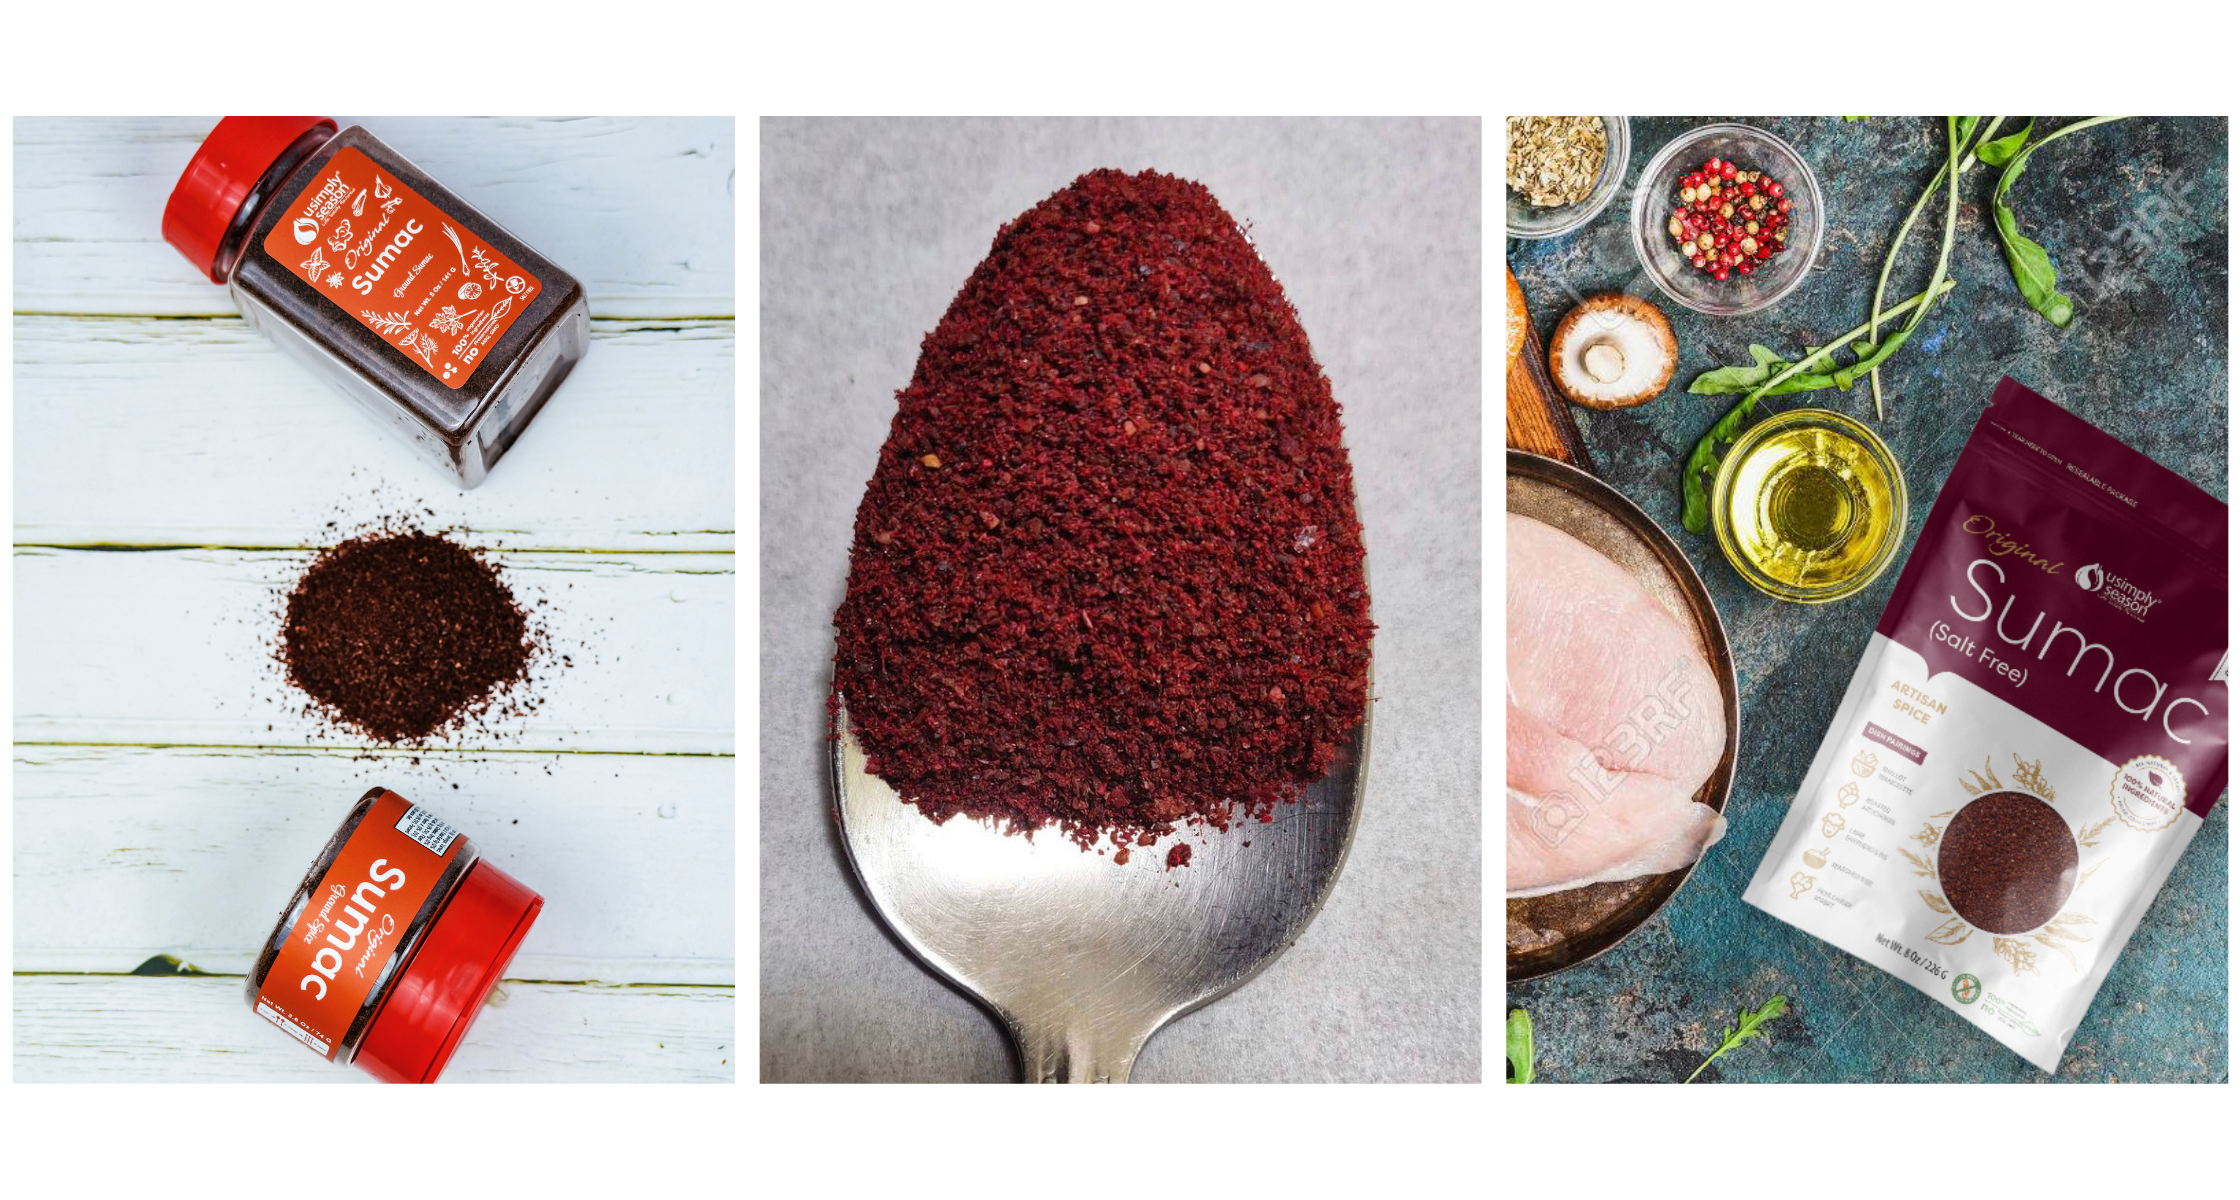 Take Your Taste Buds on a Journey with USimplySeason's Sumac spice